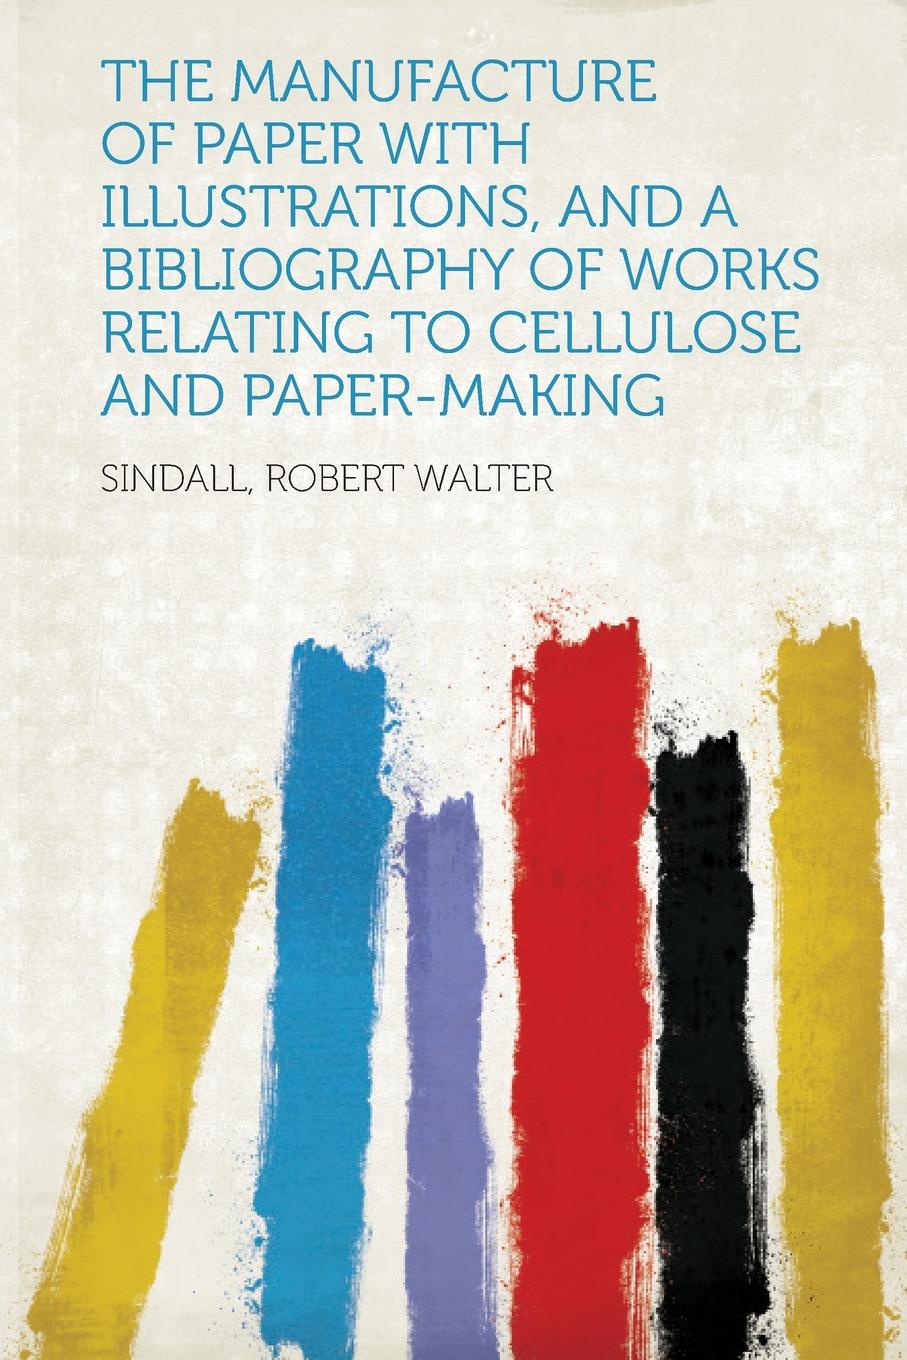 The Manufacture of Paper With Illustrations, and a Bibliography of Works Relating to Cellulose and Paper-Making